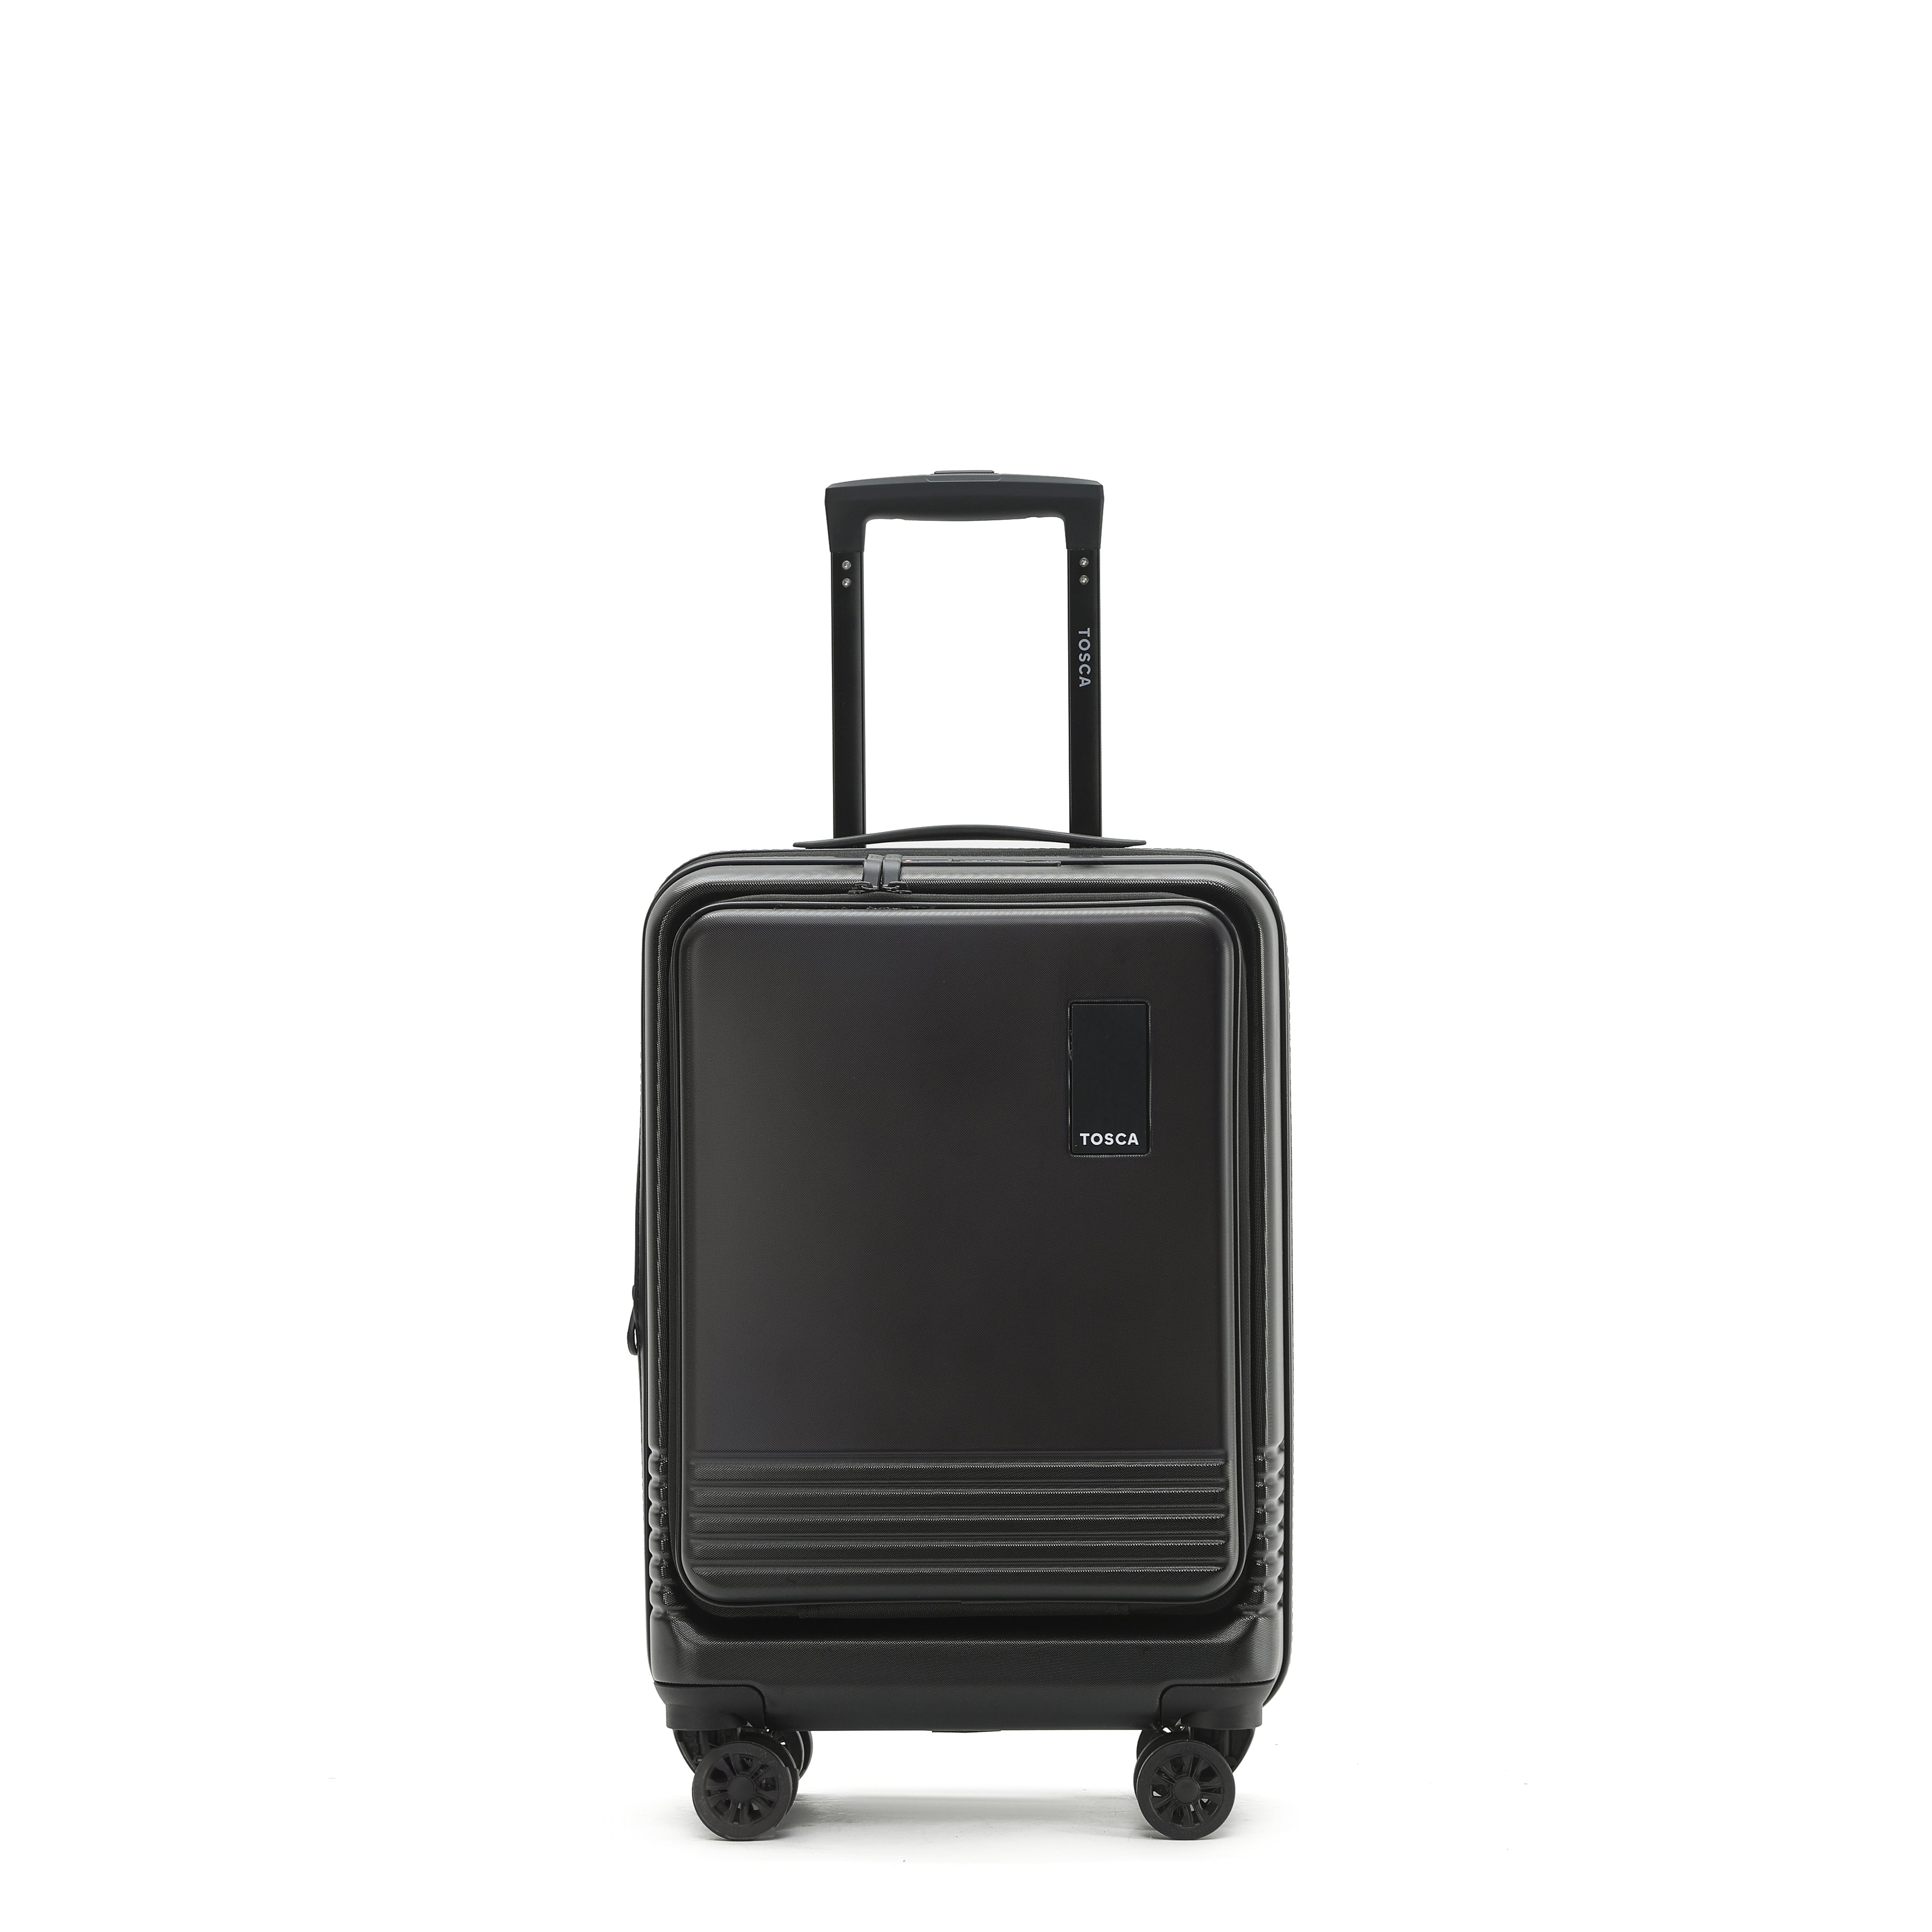 Tosca - TCA644 Horizon Front lid opening Set of 3 suitcases - Black-6